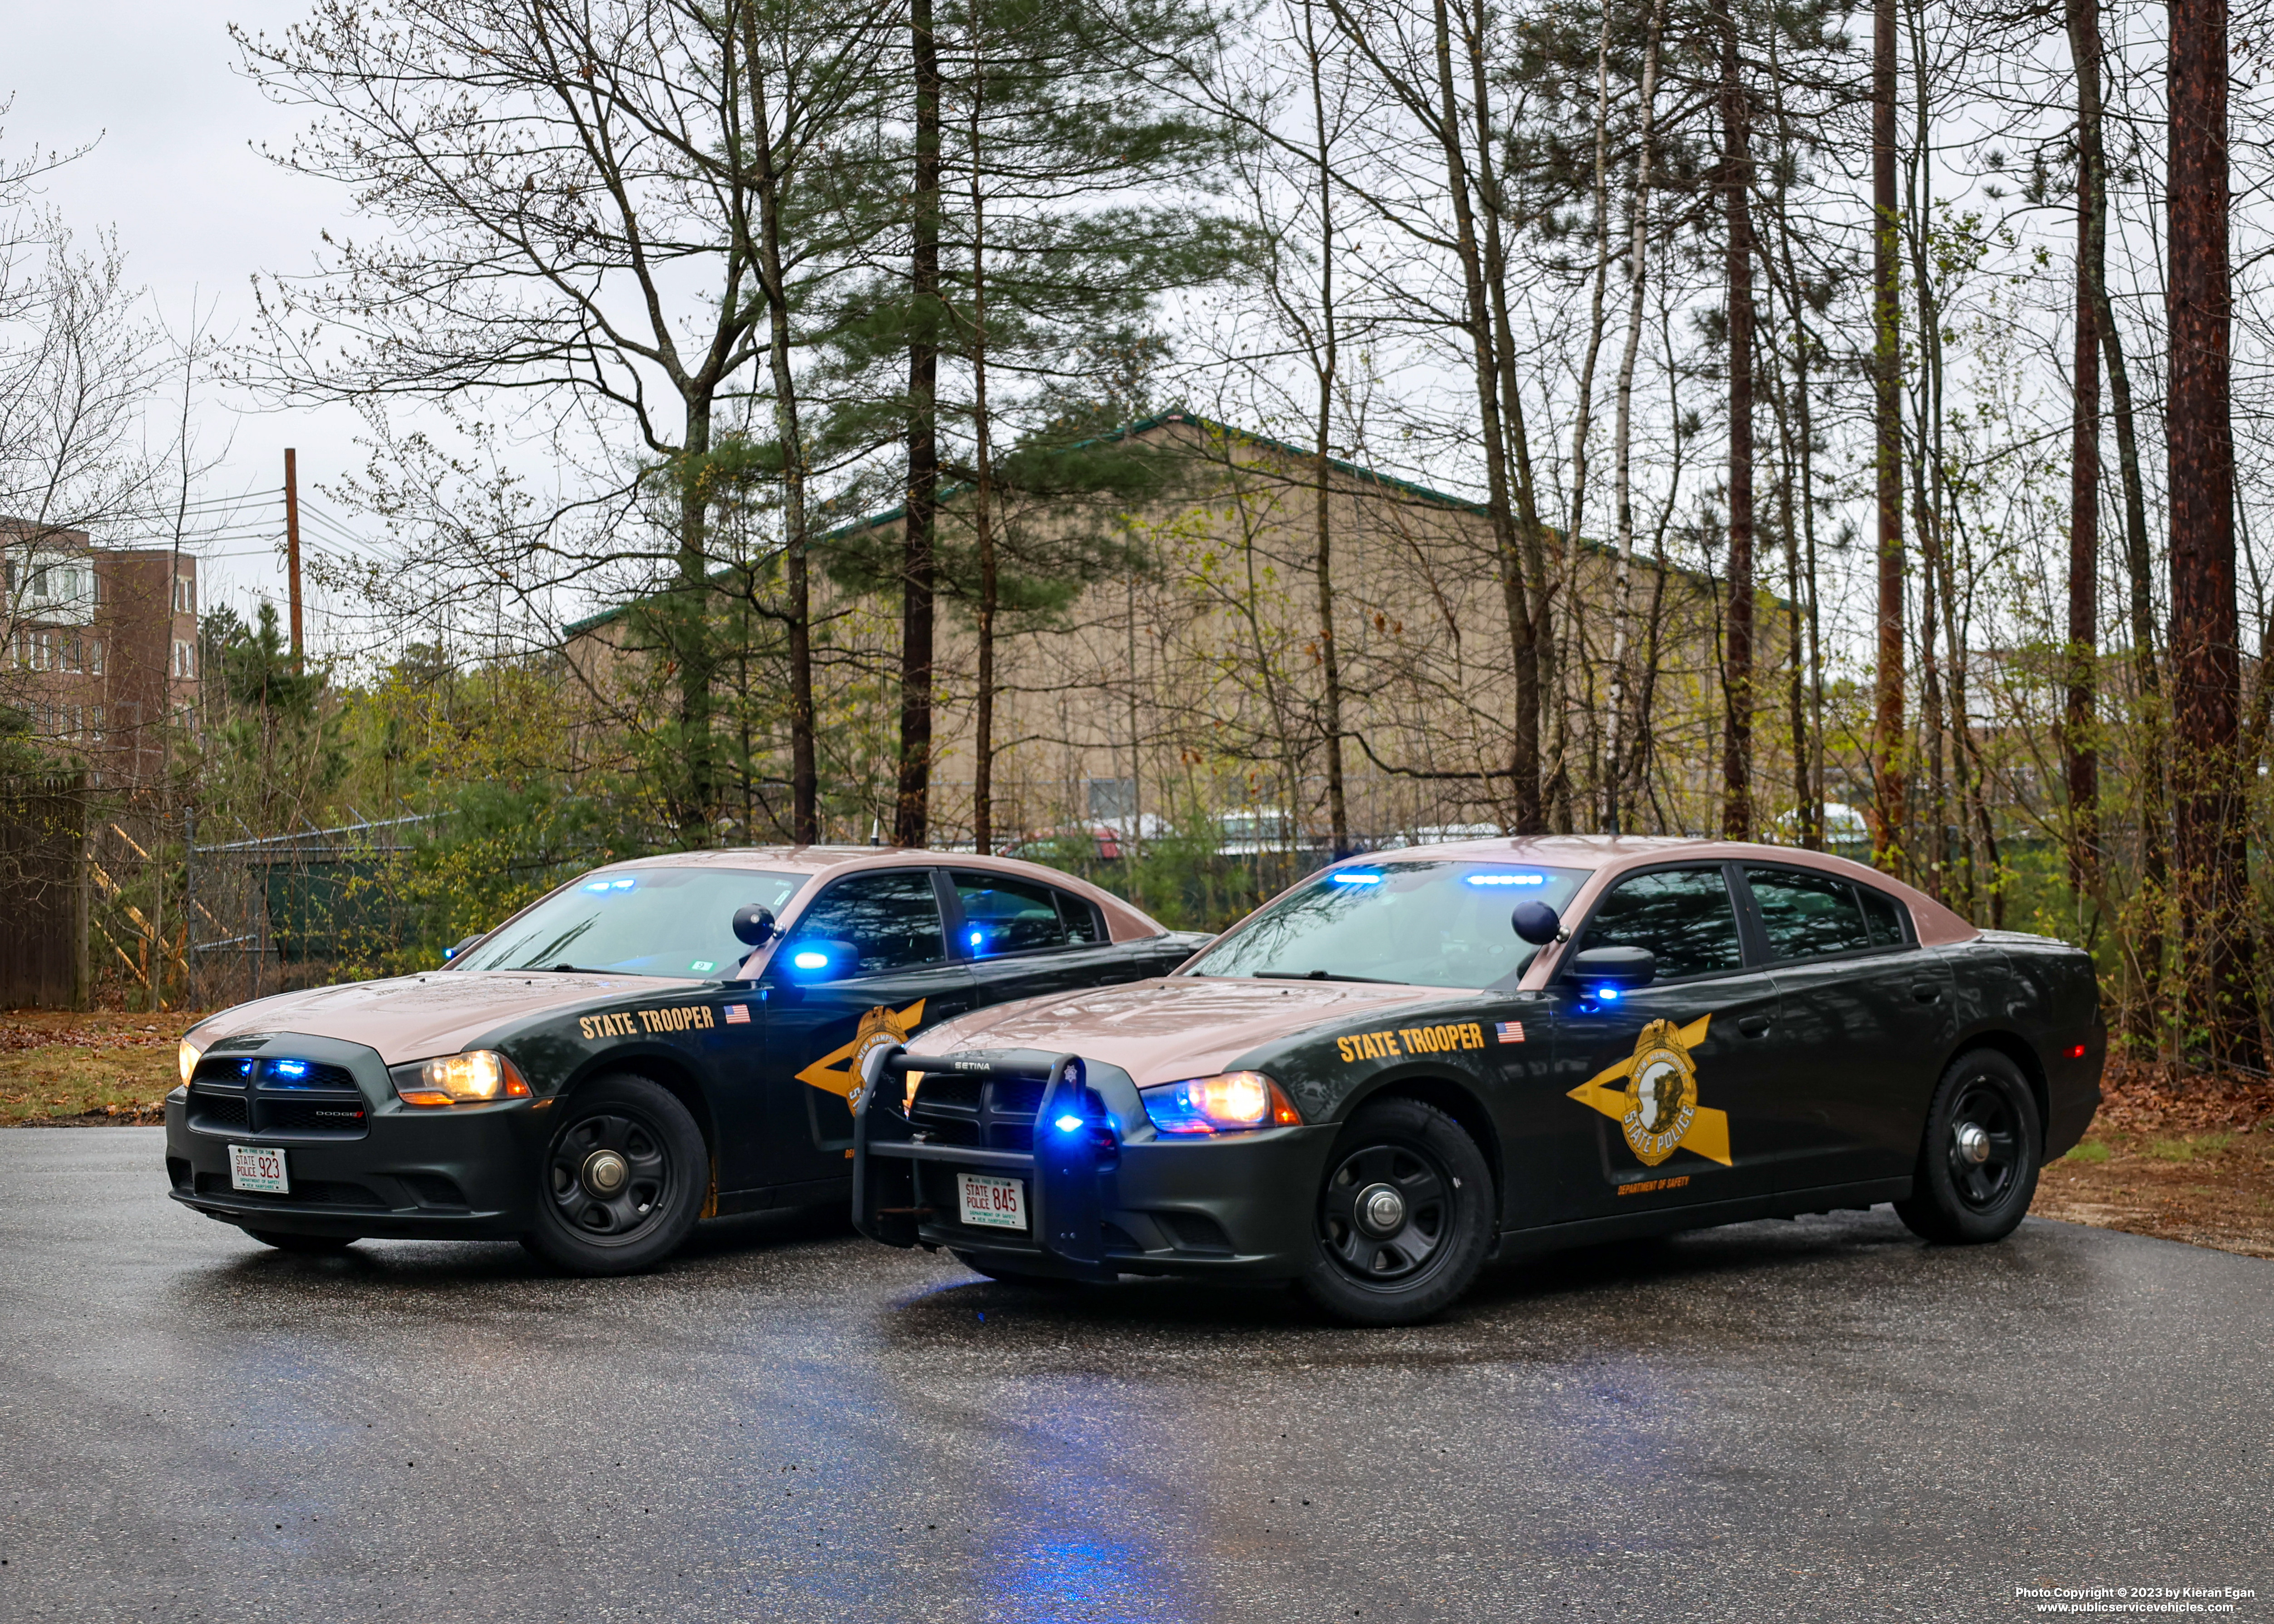 A photo  of New Hampshire State Police
            Cruiser 845, a 2011-2014 Dodge Charger             taken by Kieran Egan